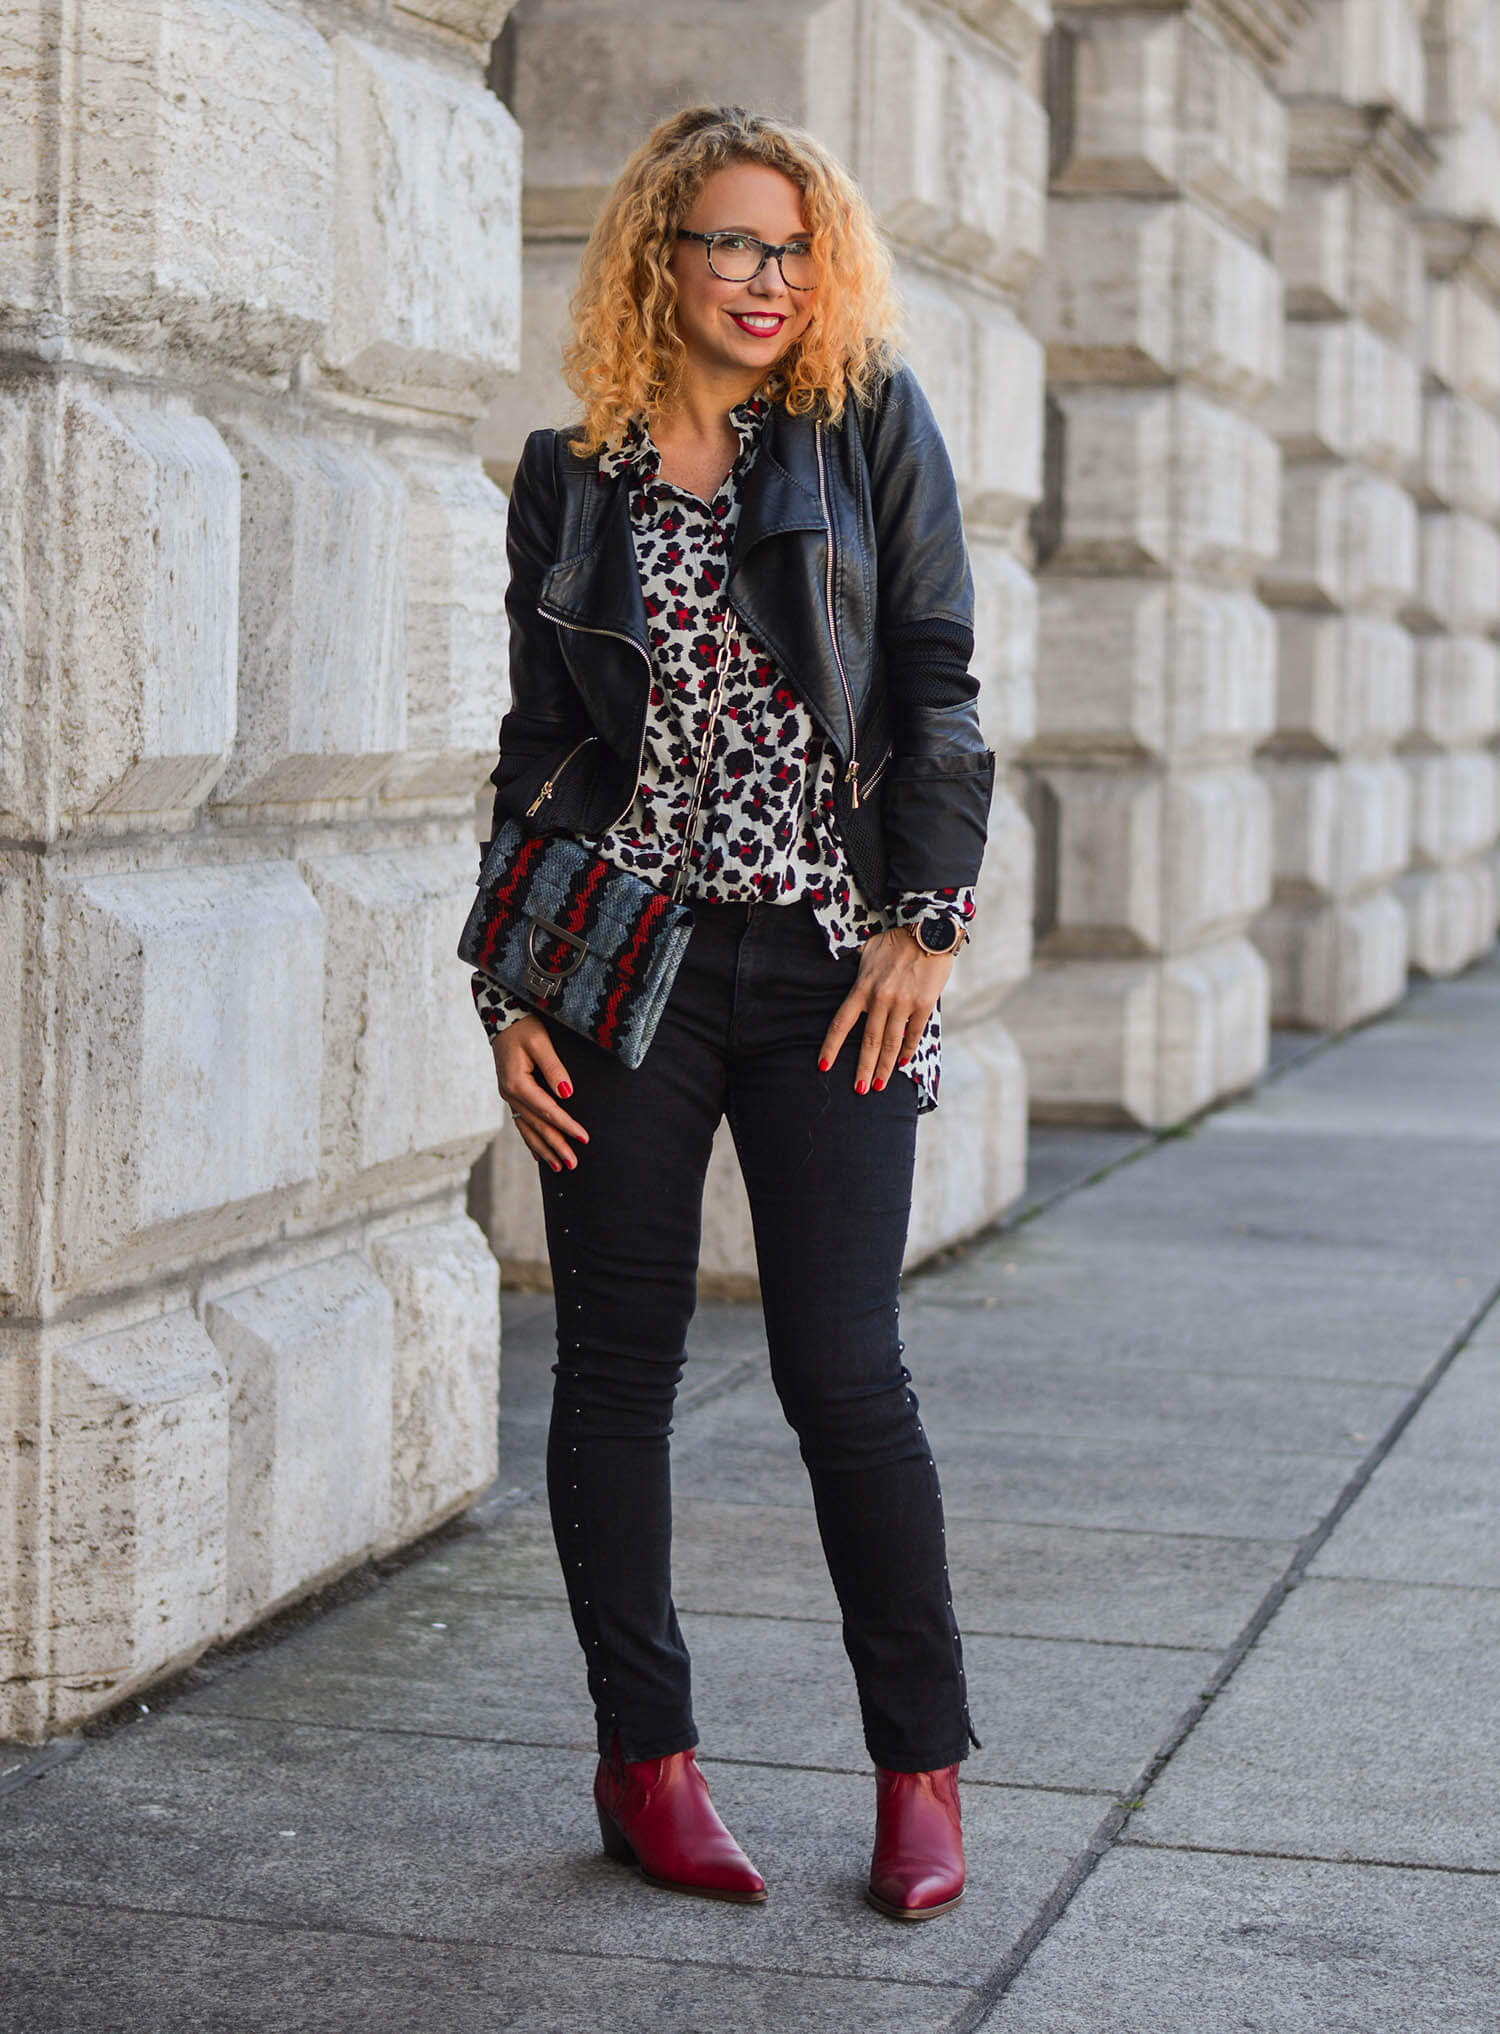 Animal-Print-Studded-Denim-Leather-Jacket-Cowboy-Boots-Fall-Outfit-kationette-fashionblogger-germany